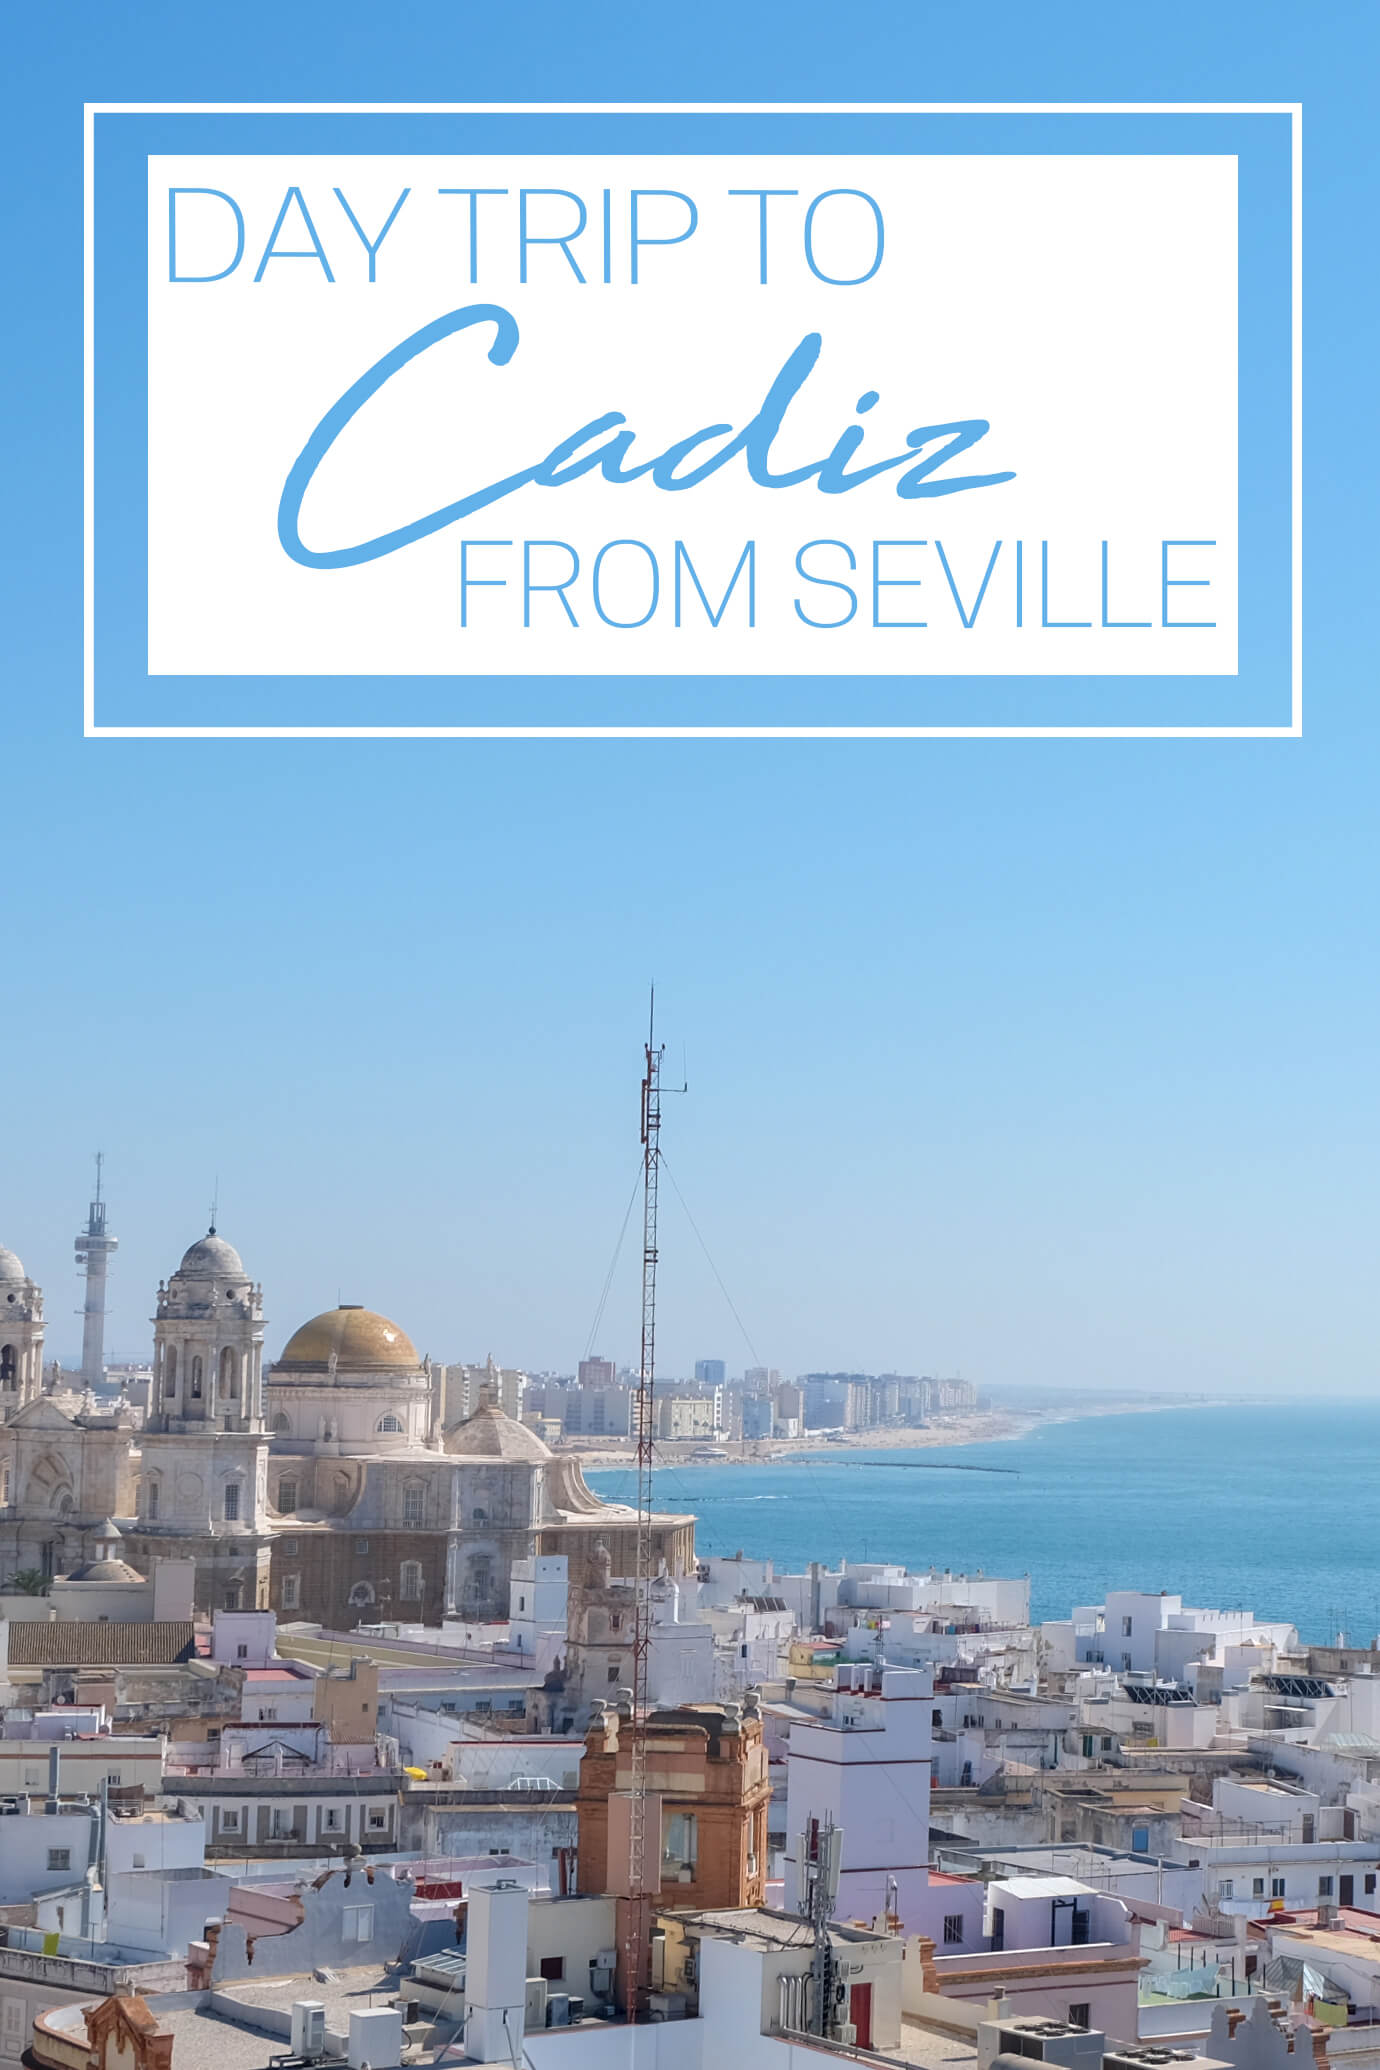 Day-trip-to-Cadiz from Seville